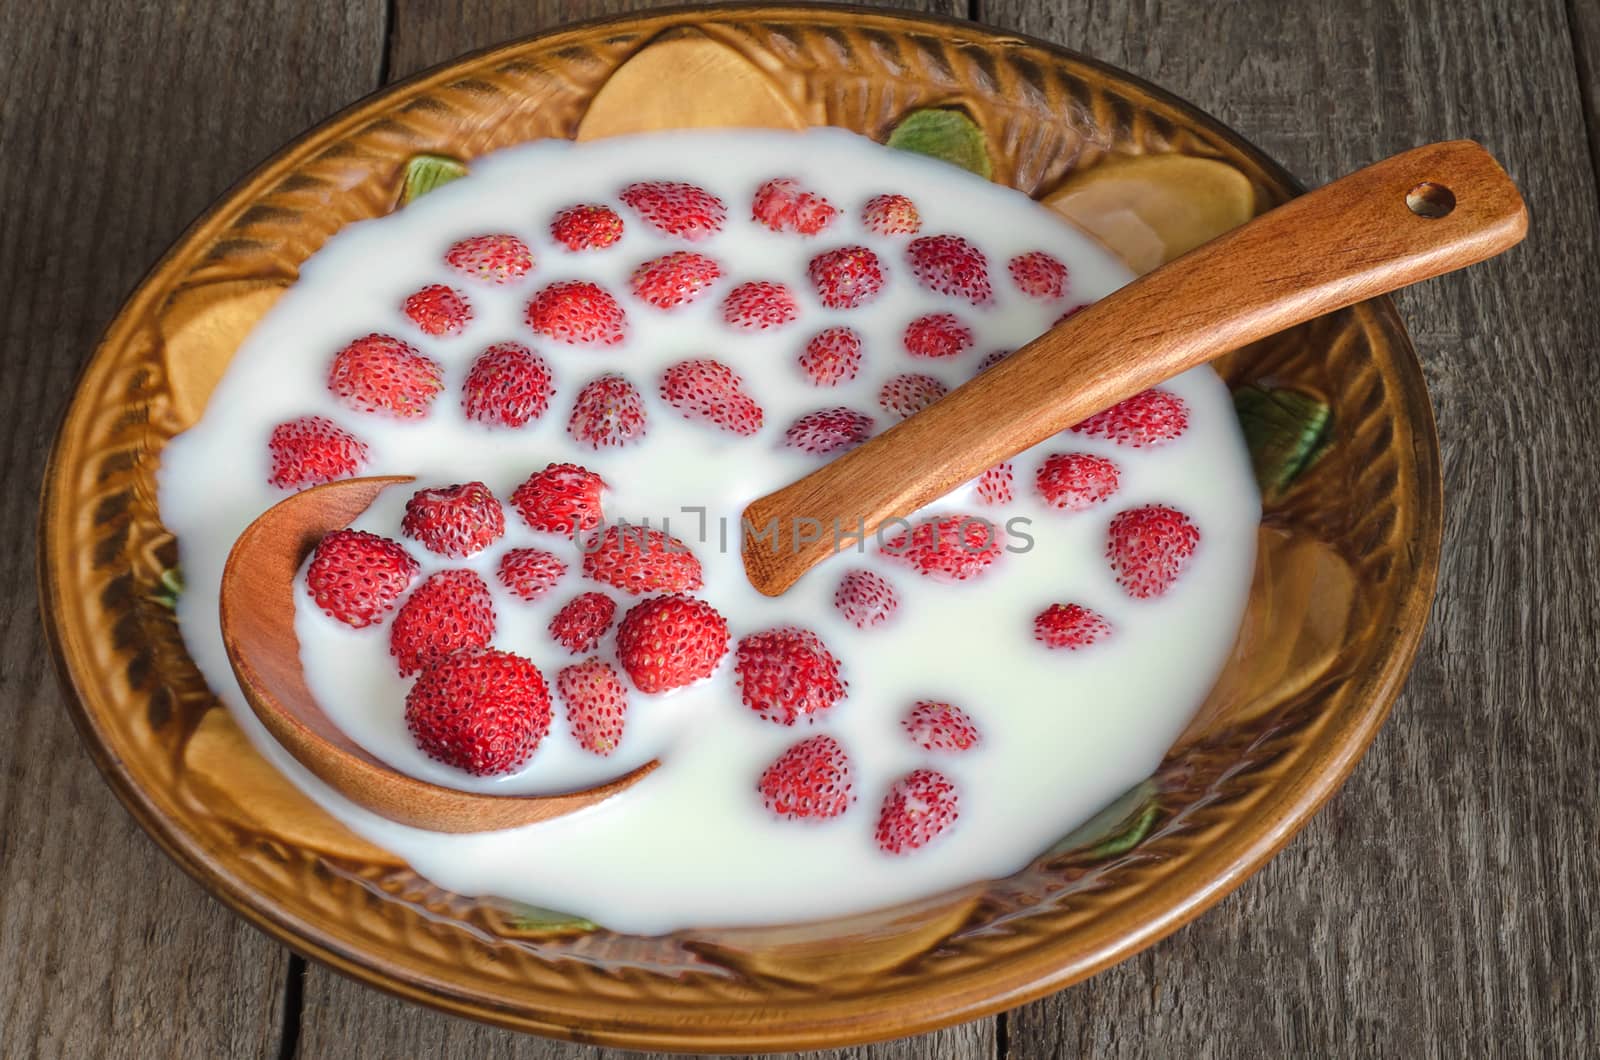 Strawberries with milk in a bowl by Gaina